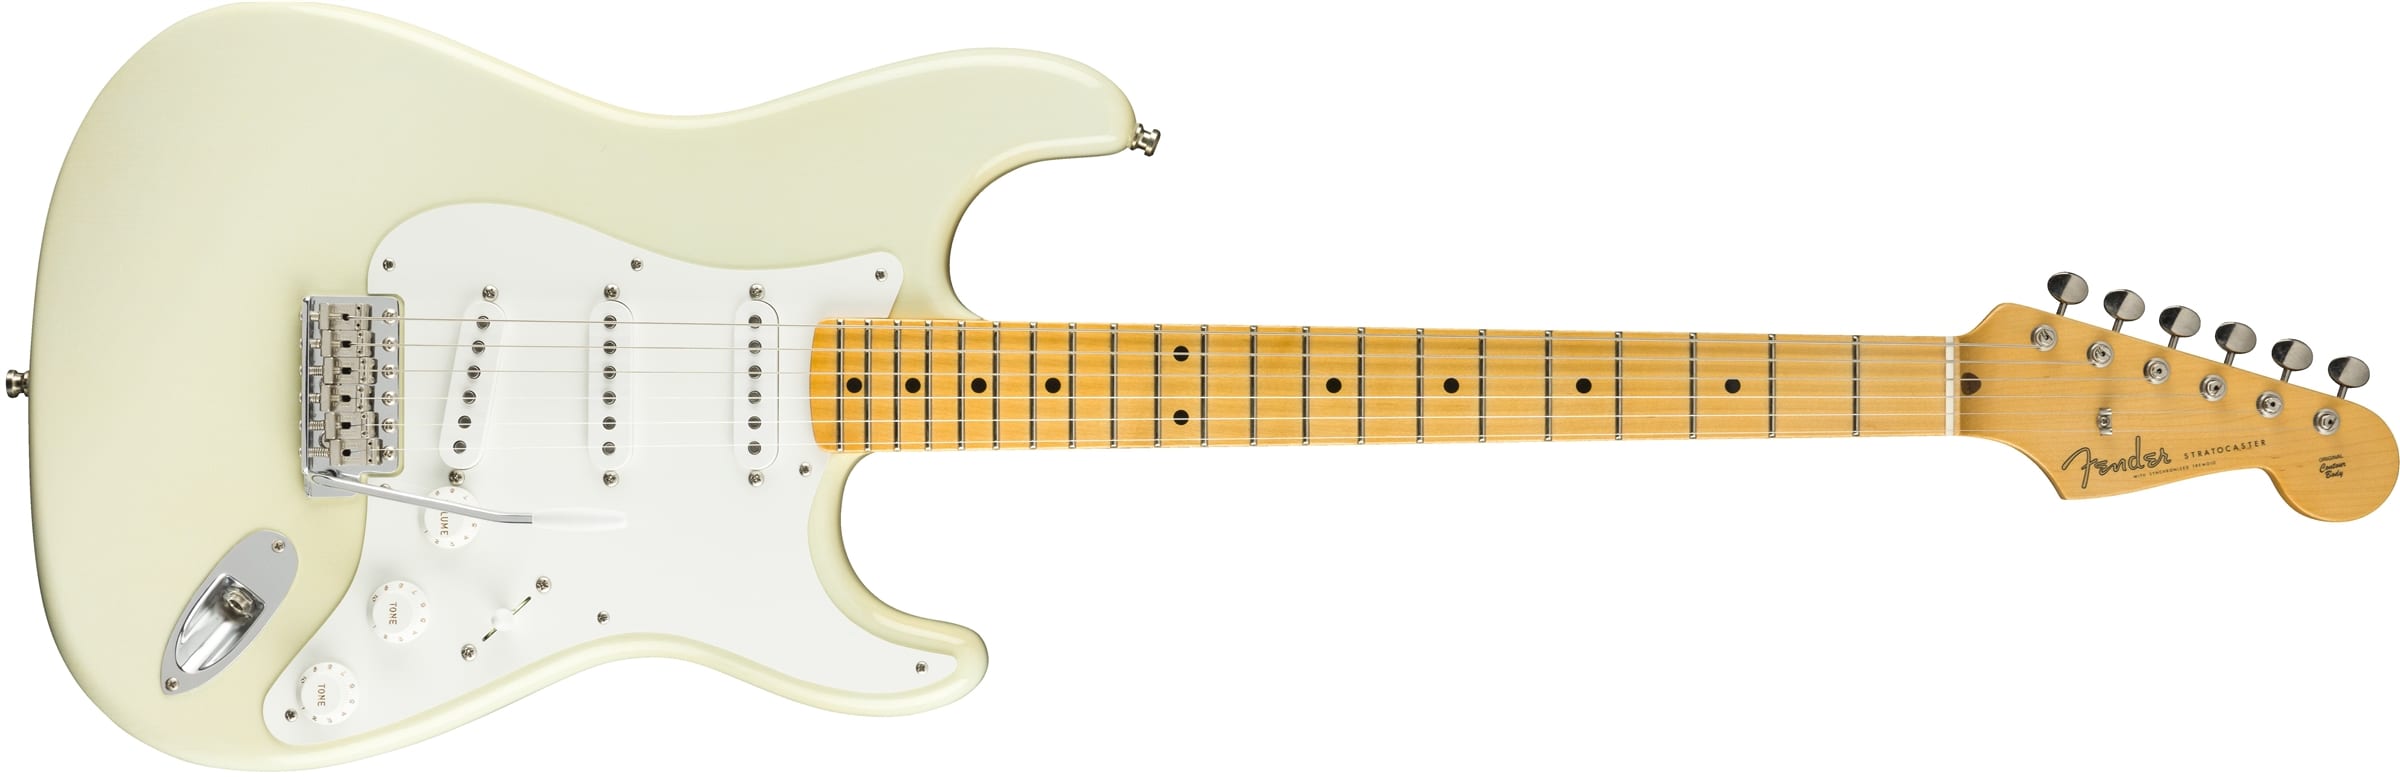 Fender Custom Shop Jimmie Vaughan Stratocaster in Aged Olympic White